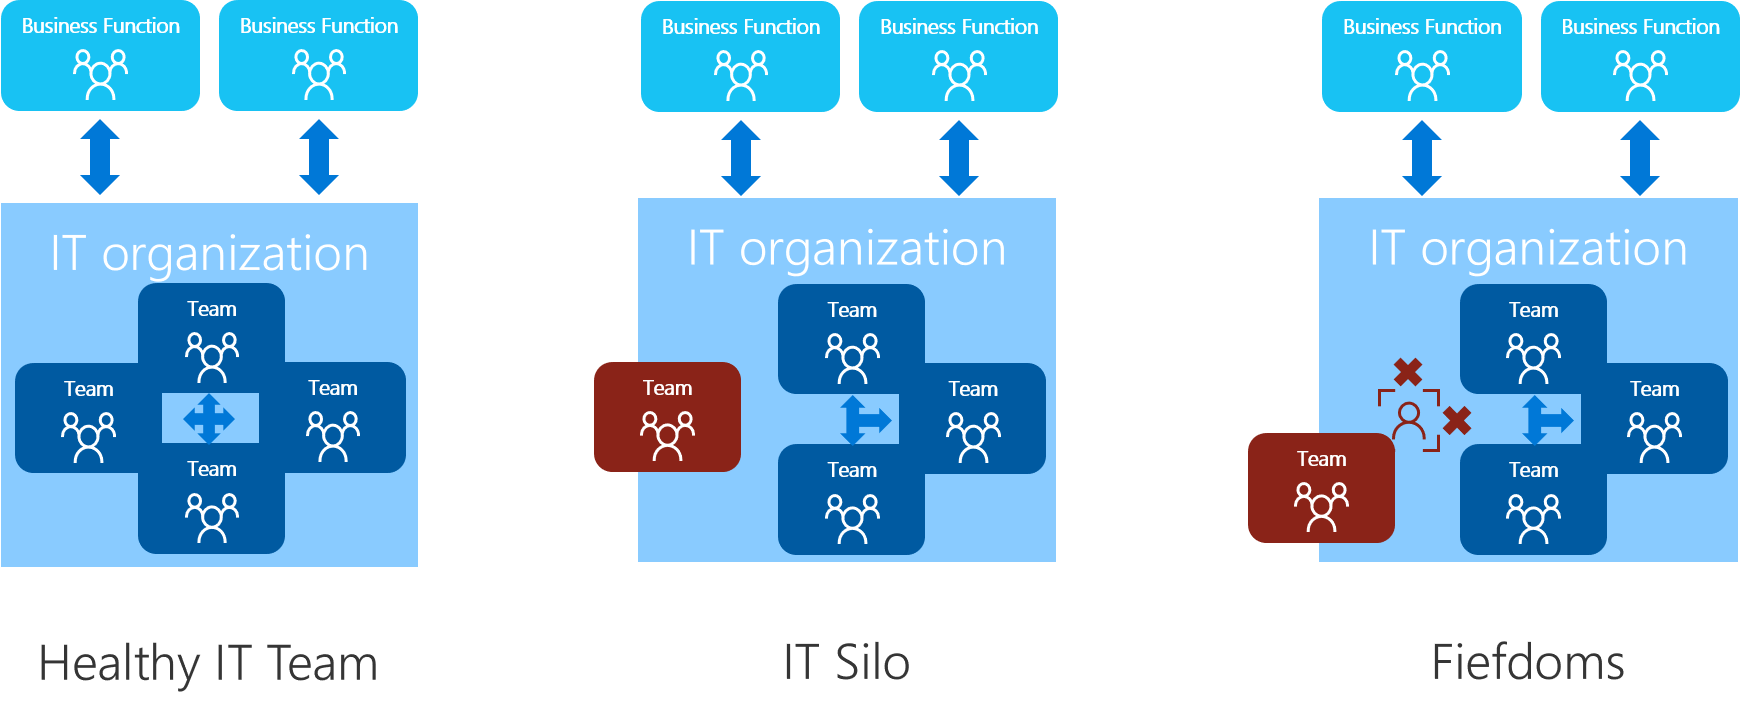 Diagram that shows a comparison of healthy teams and organizational antipatterns.